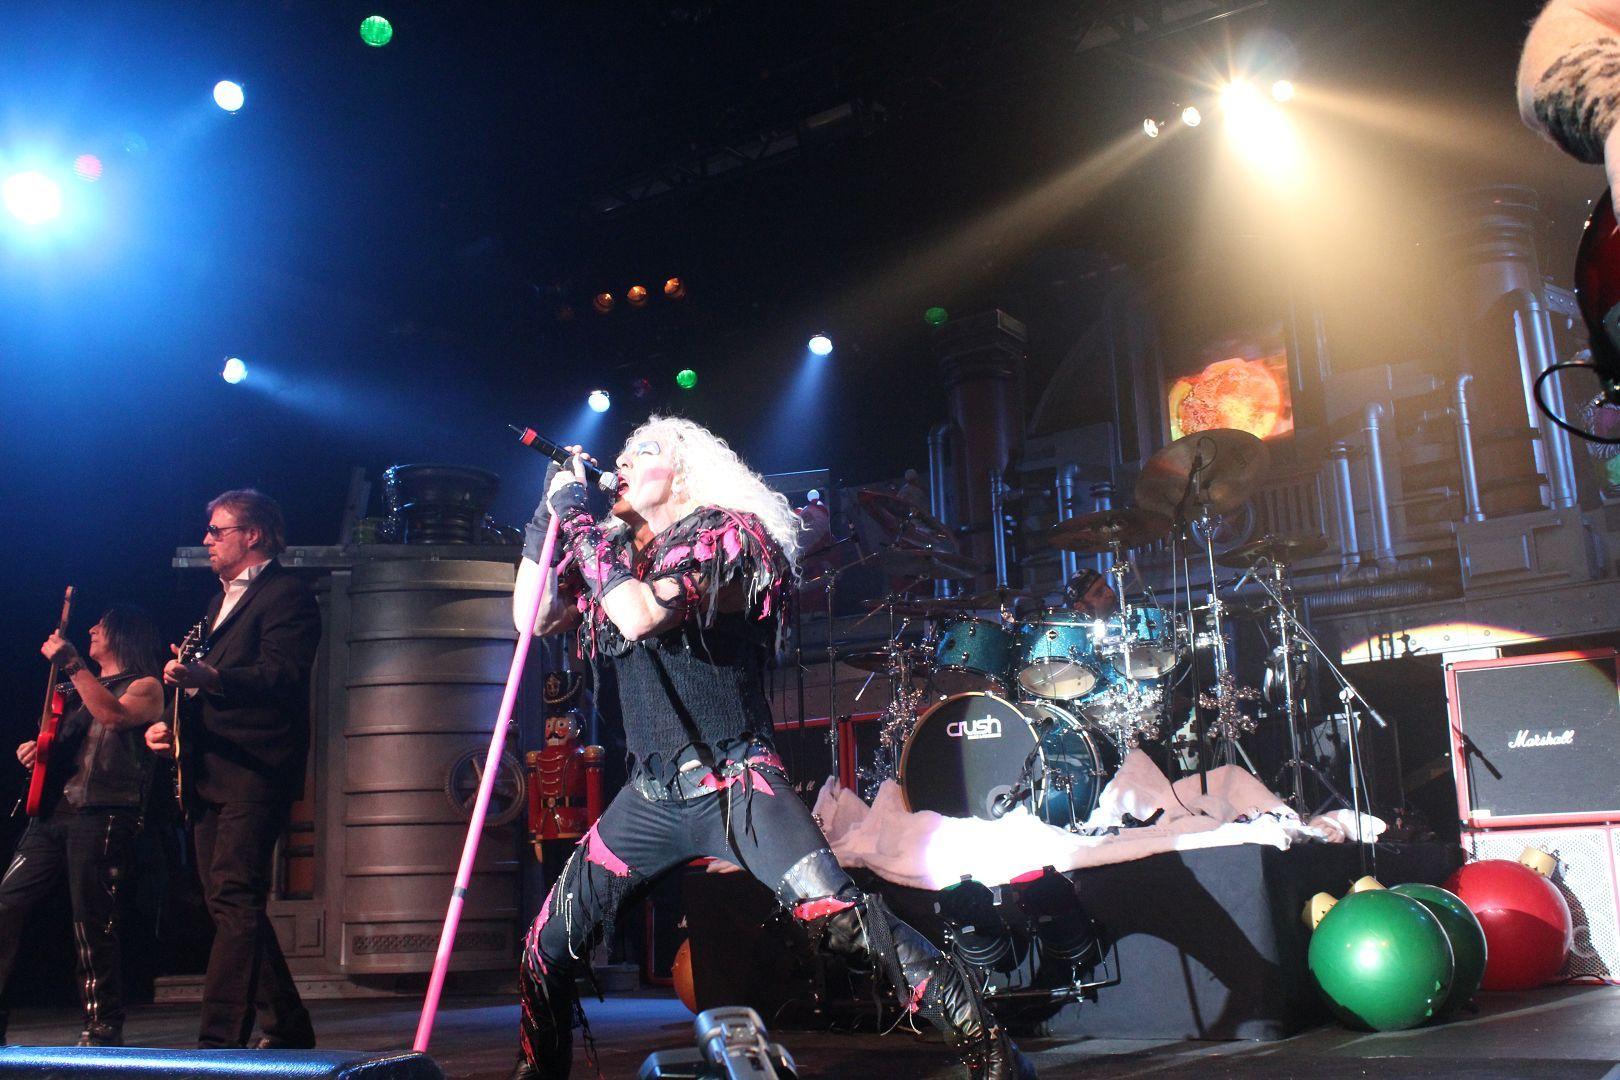 Twisted Sister's “A Twisted Christmas” at The Best Buy Theater: A